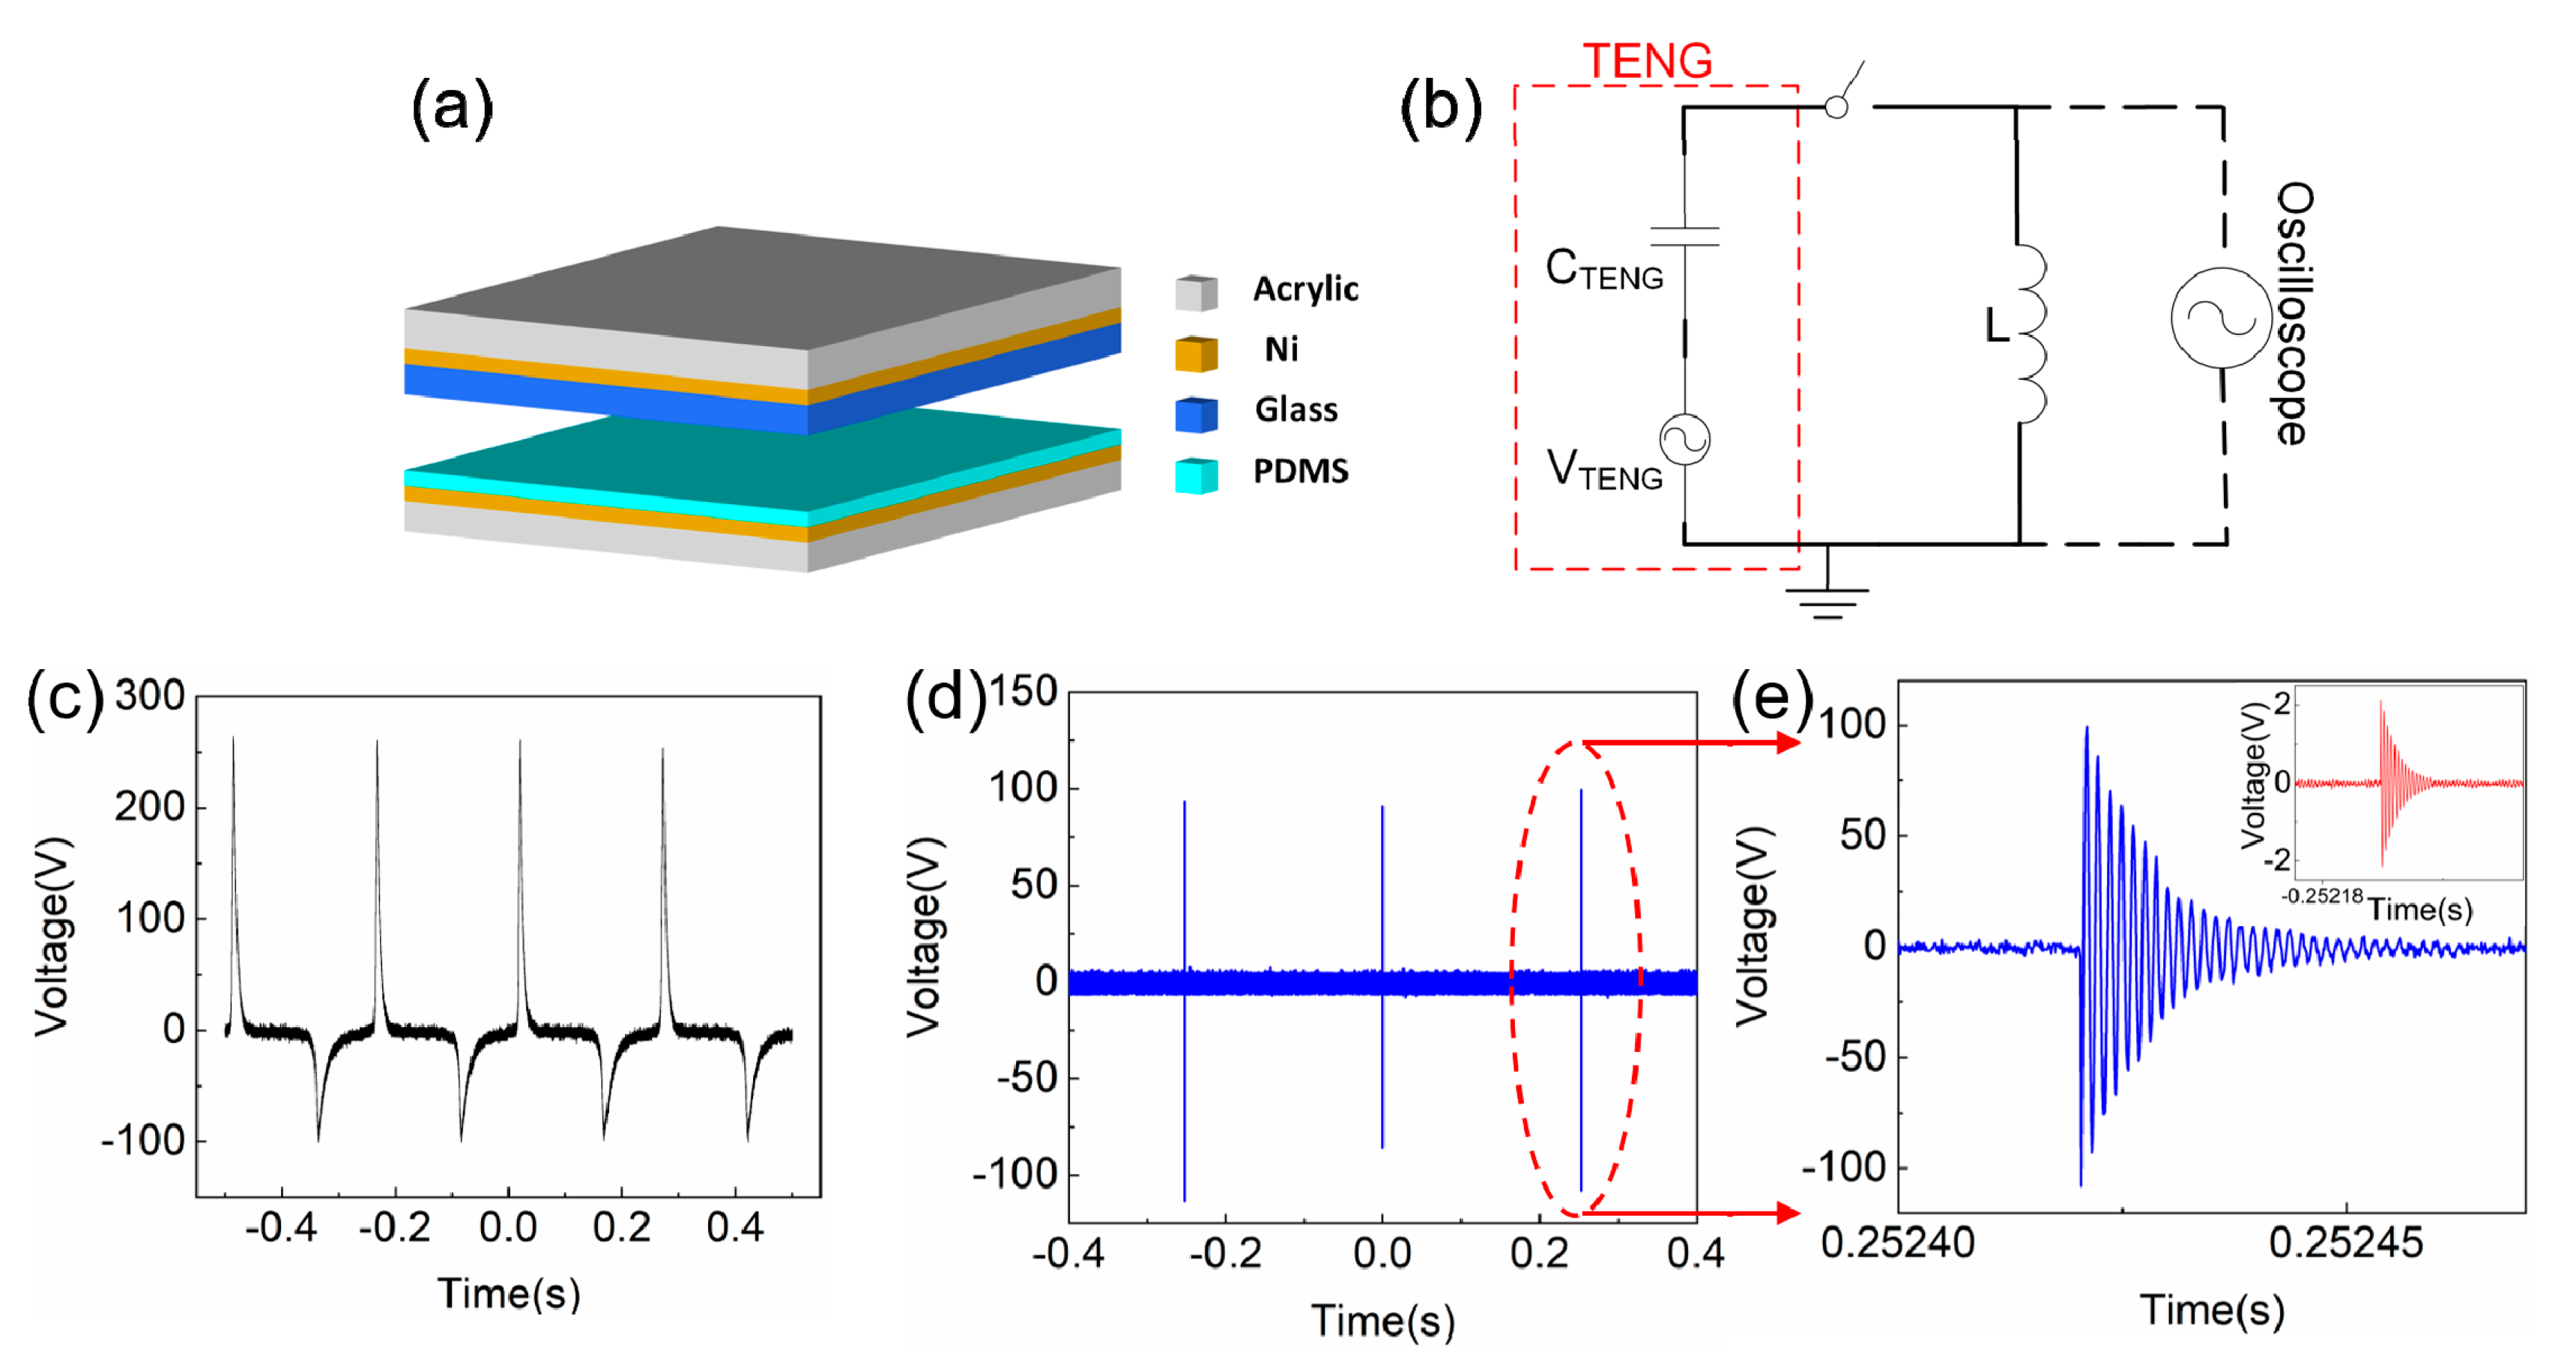 One-Piece Triboelectric Nanosensor for Self-Triggered Alarm System and  Latent Fingerprint Detection